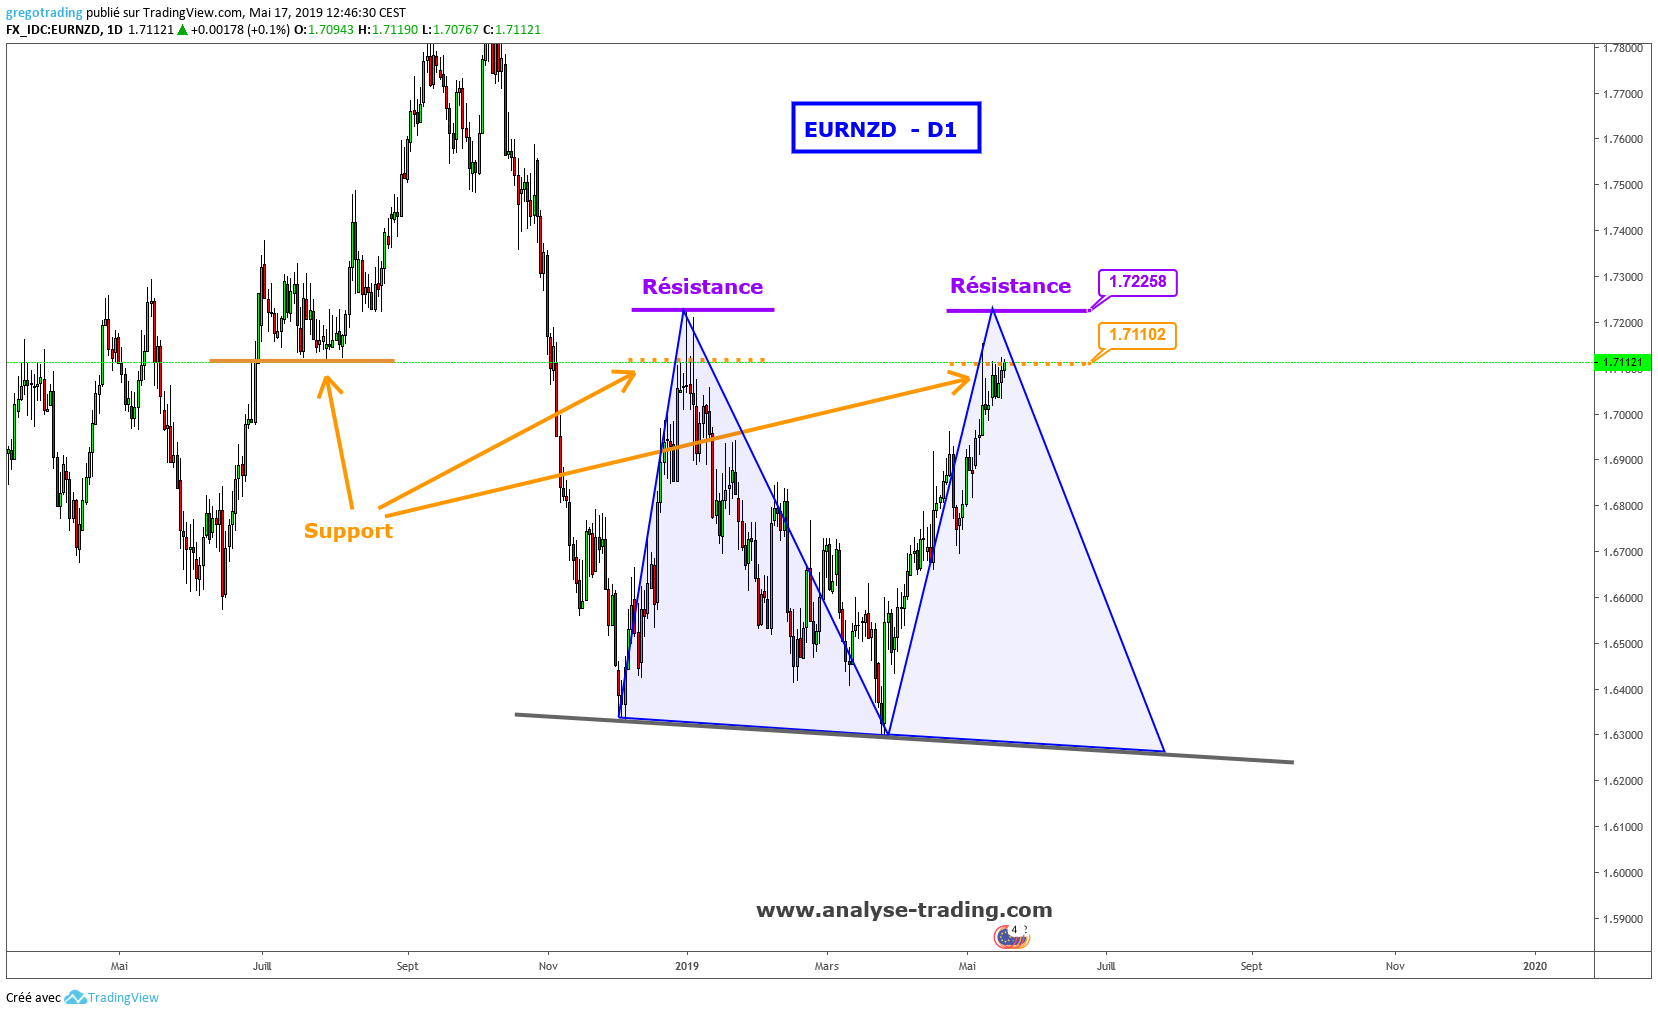 EURNZD - Daily.png